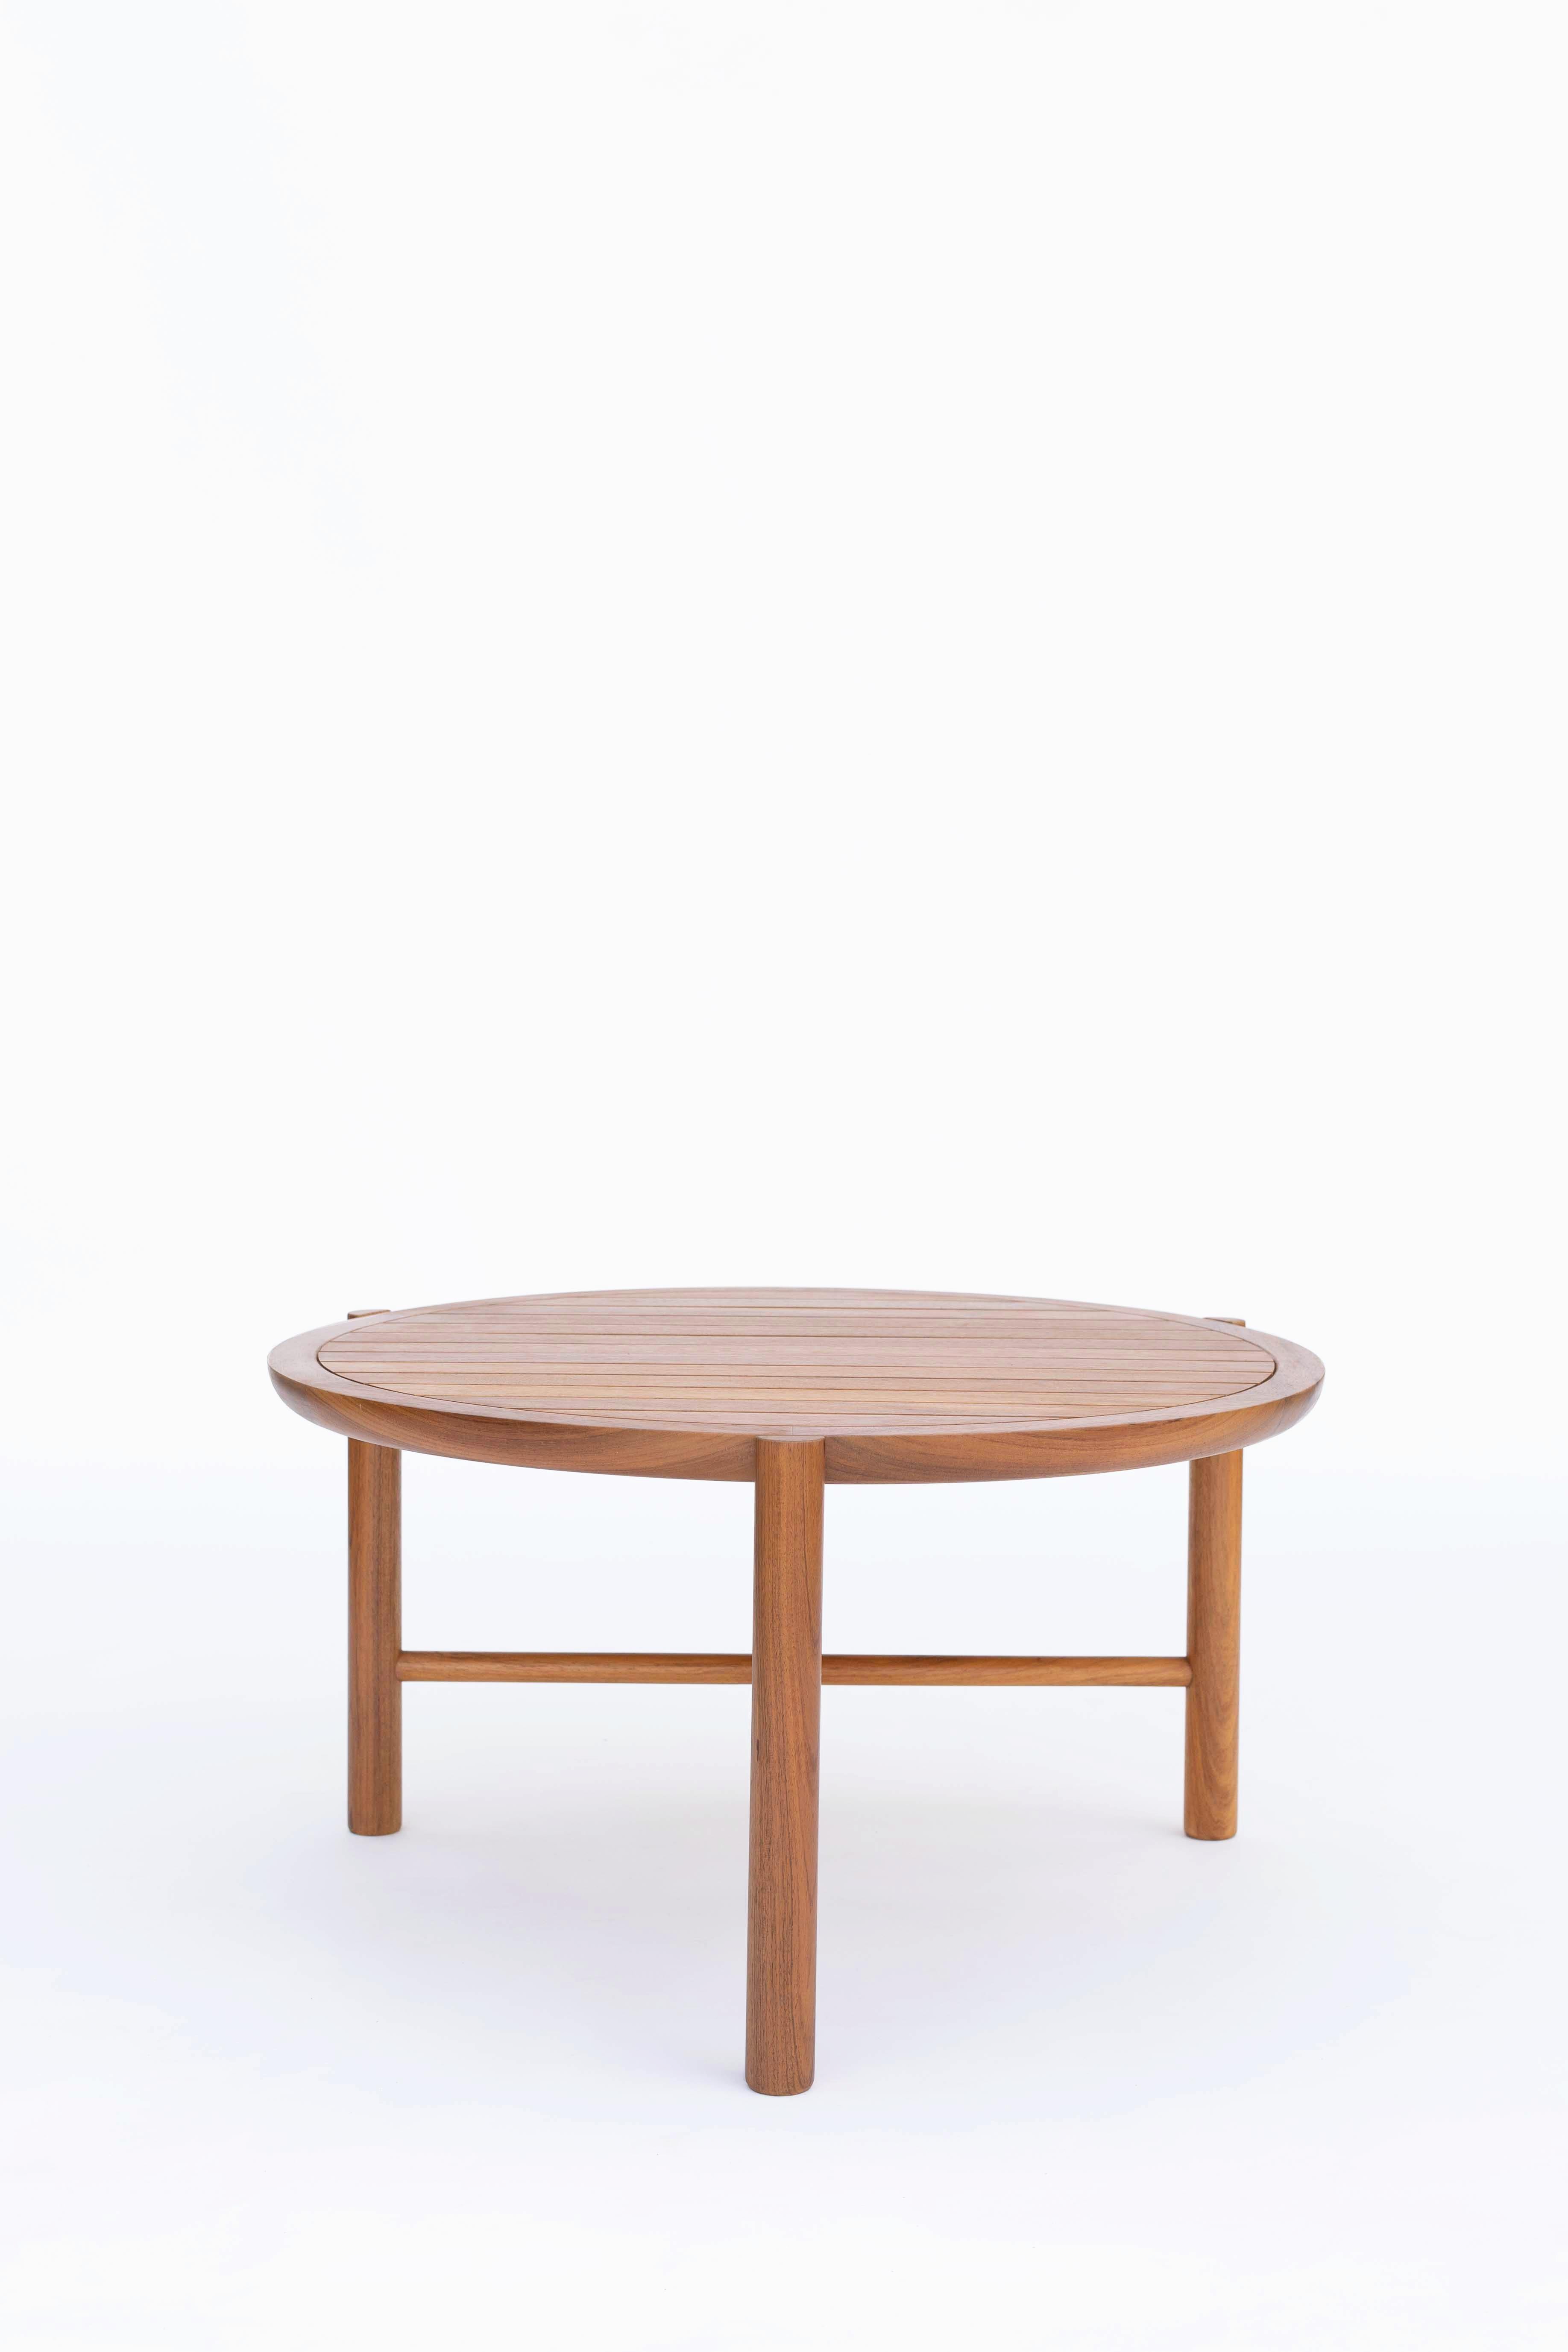 Woodwork Minimalist Round Coffee Table in Mexican Hardwood For Sale